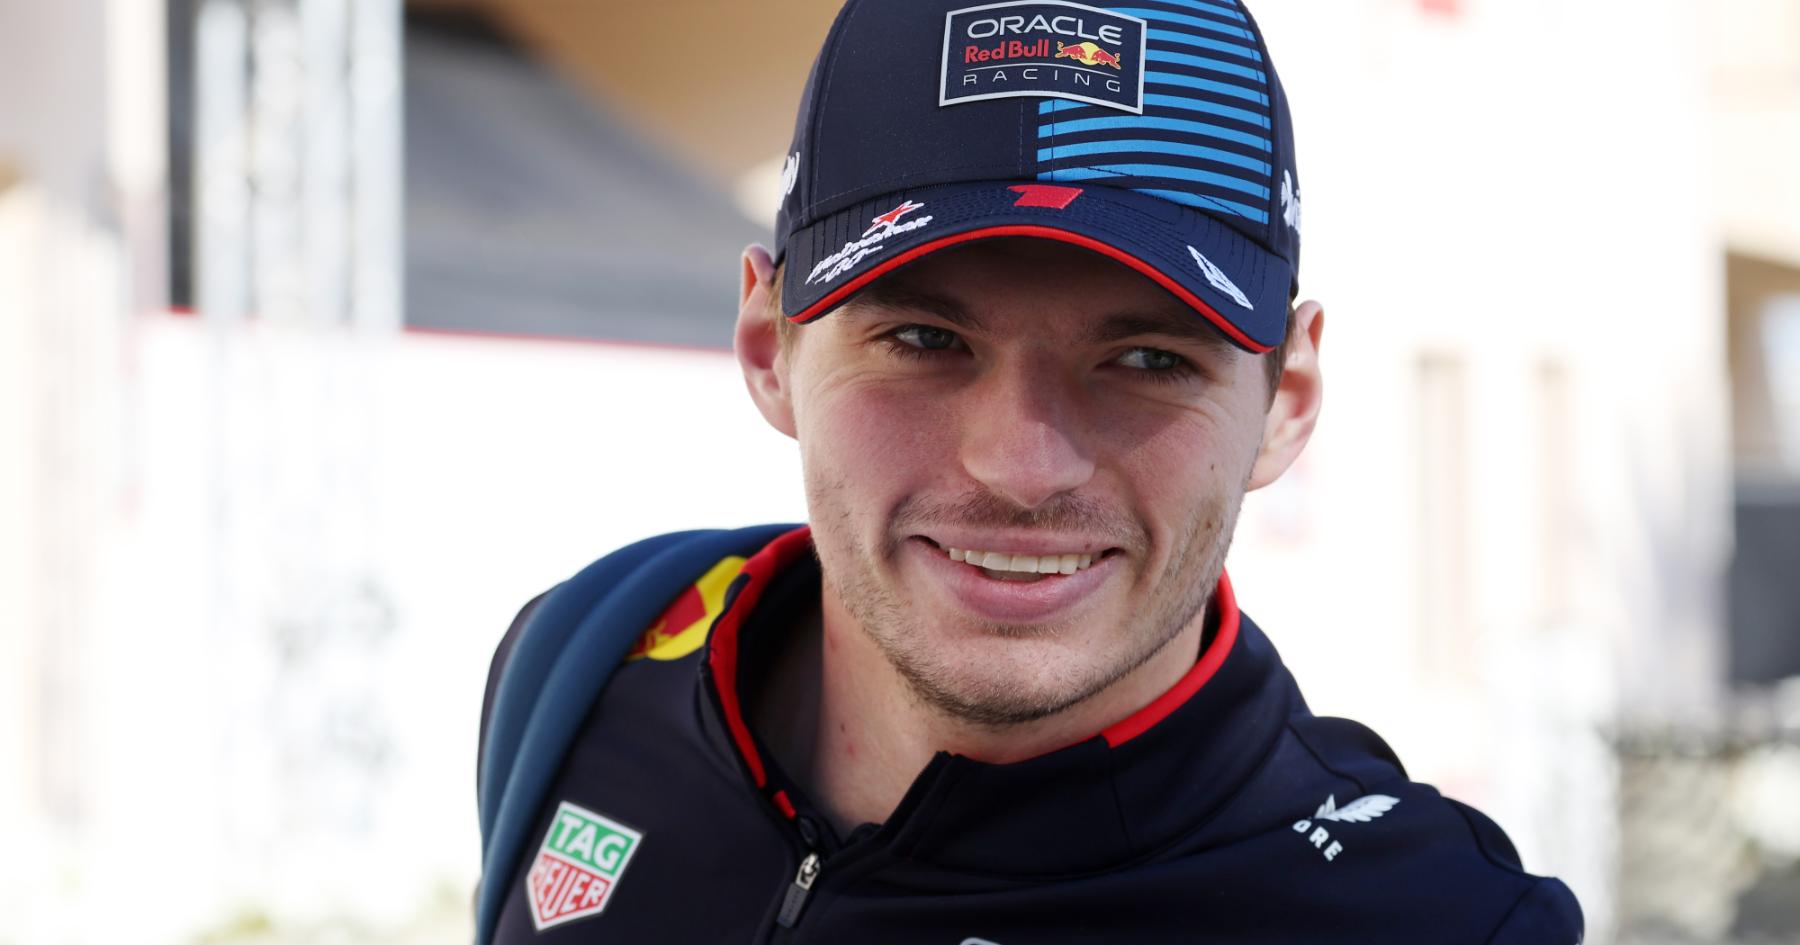 Electric Spark: Formula E CEO Commits $250k Charity Donation If Verstappen is Overtaken